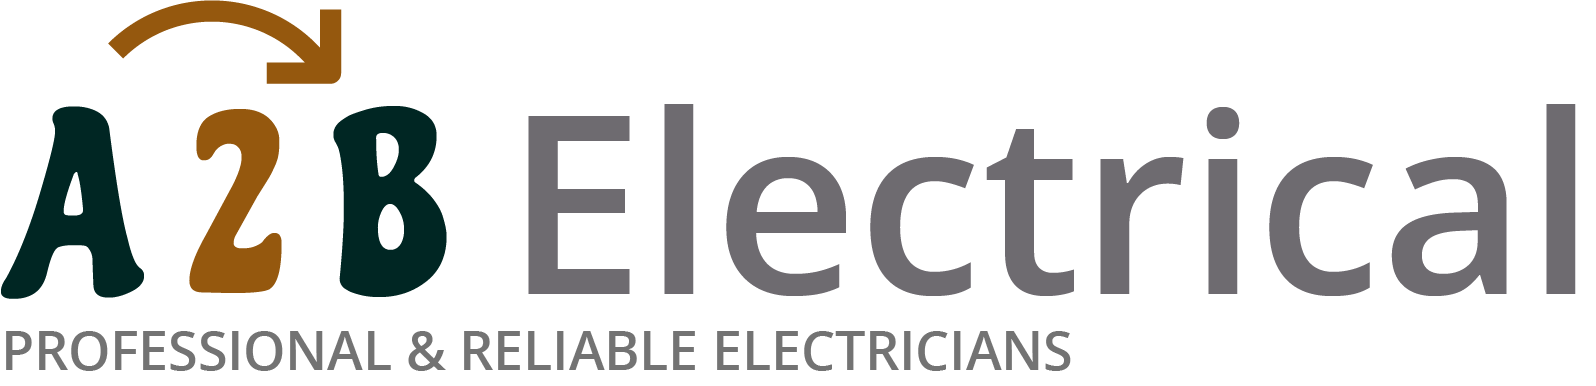 If you have electrical wiring problems in Hampton, we can provide an electrician to have a look for you. 